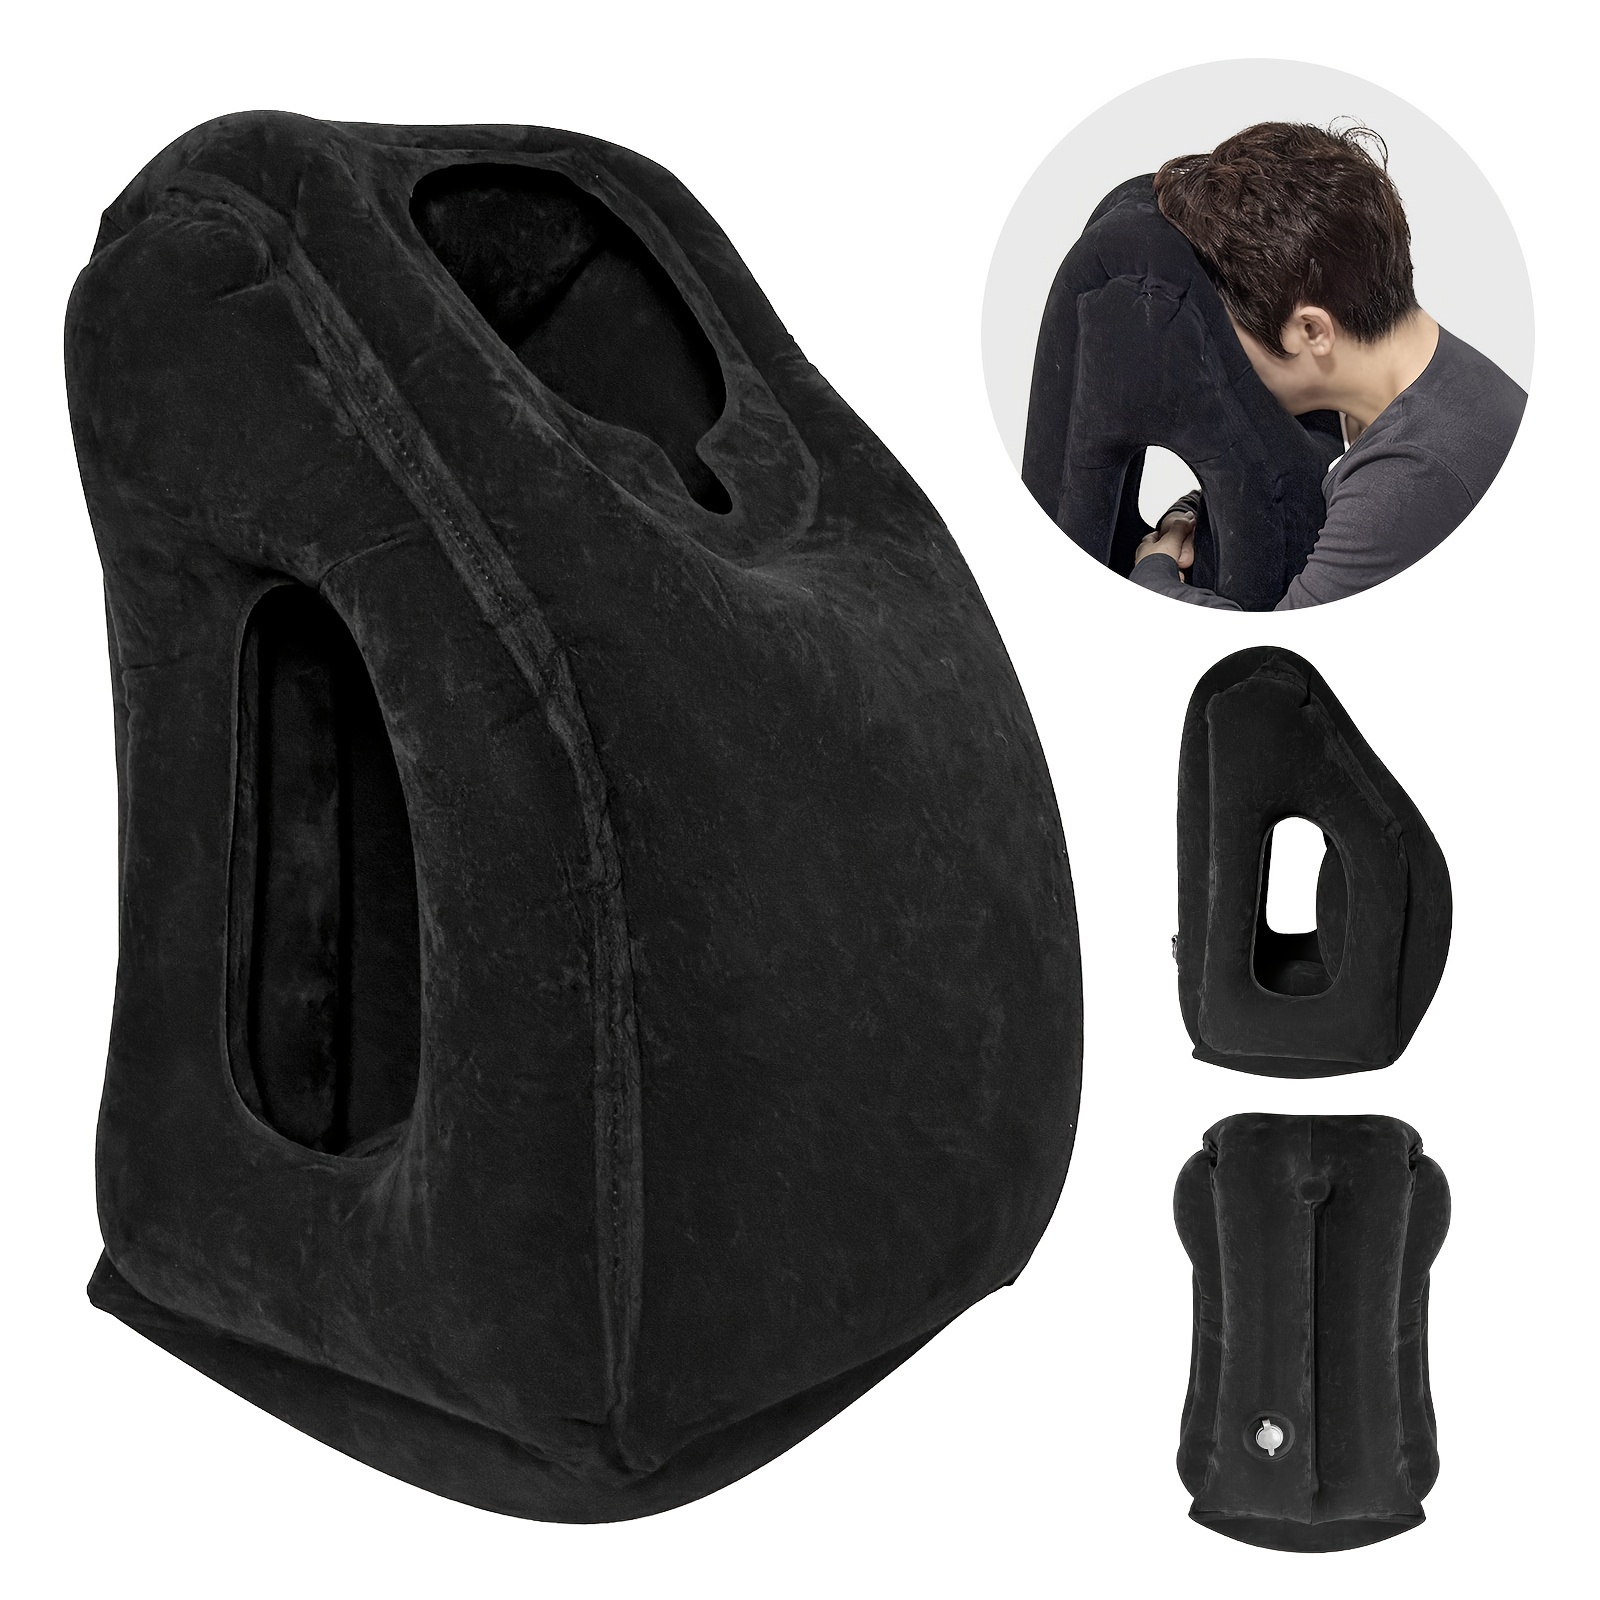 

1pc Travel Pillow, Portable Head Neck Rest Inflatable Pillow, For Airplanes, Cars, Buses, Trains, Office Napping, Camping